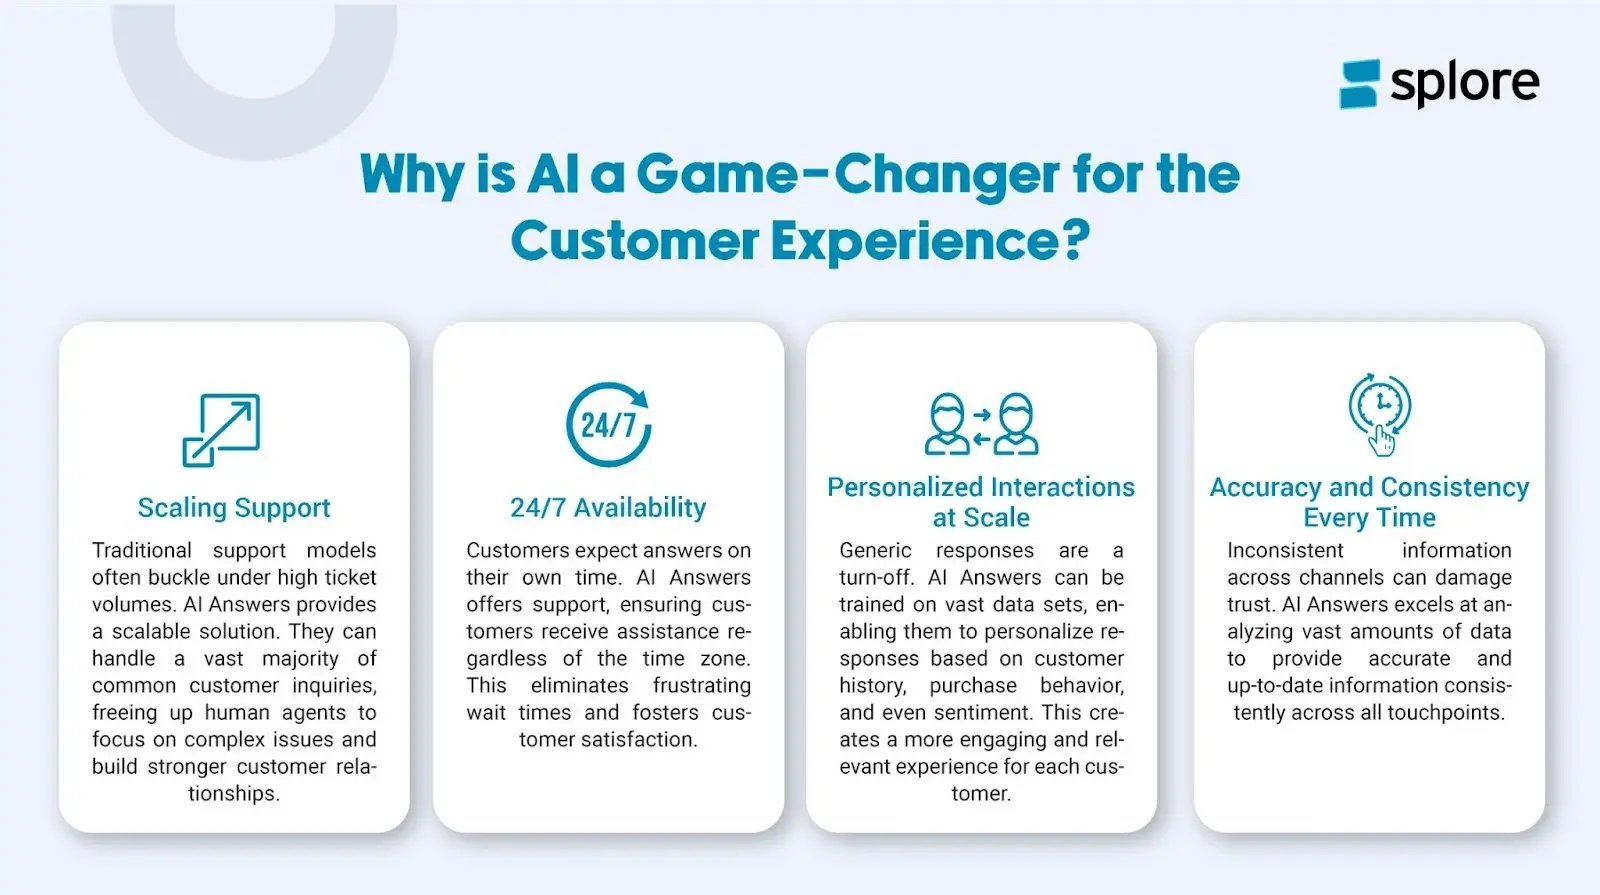 Why is Ai a Game-Changer for the Customer Experience